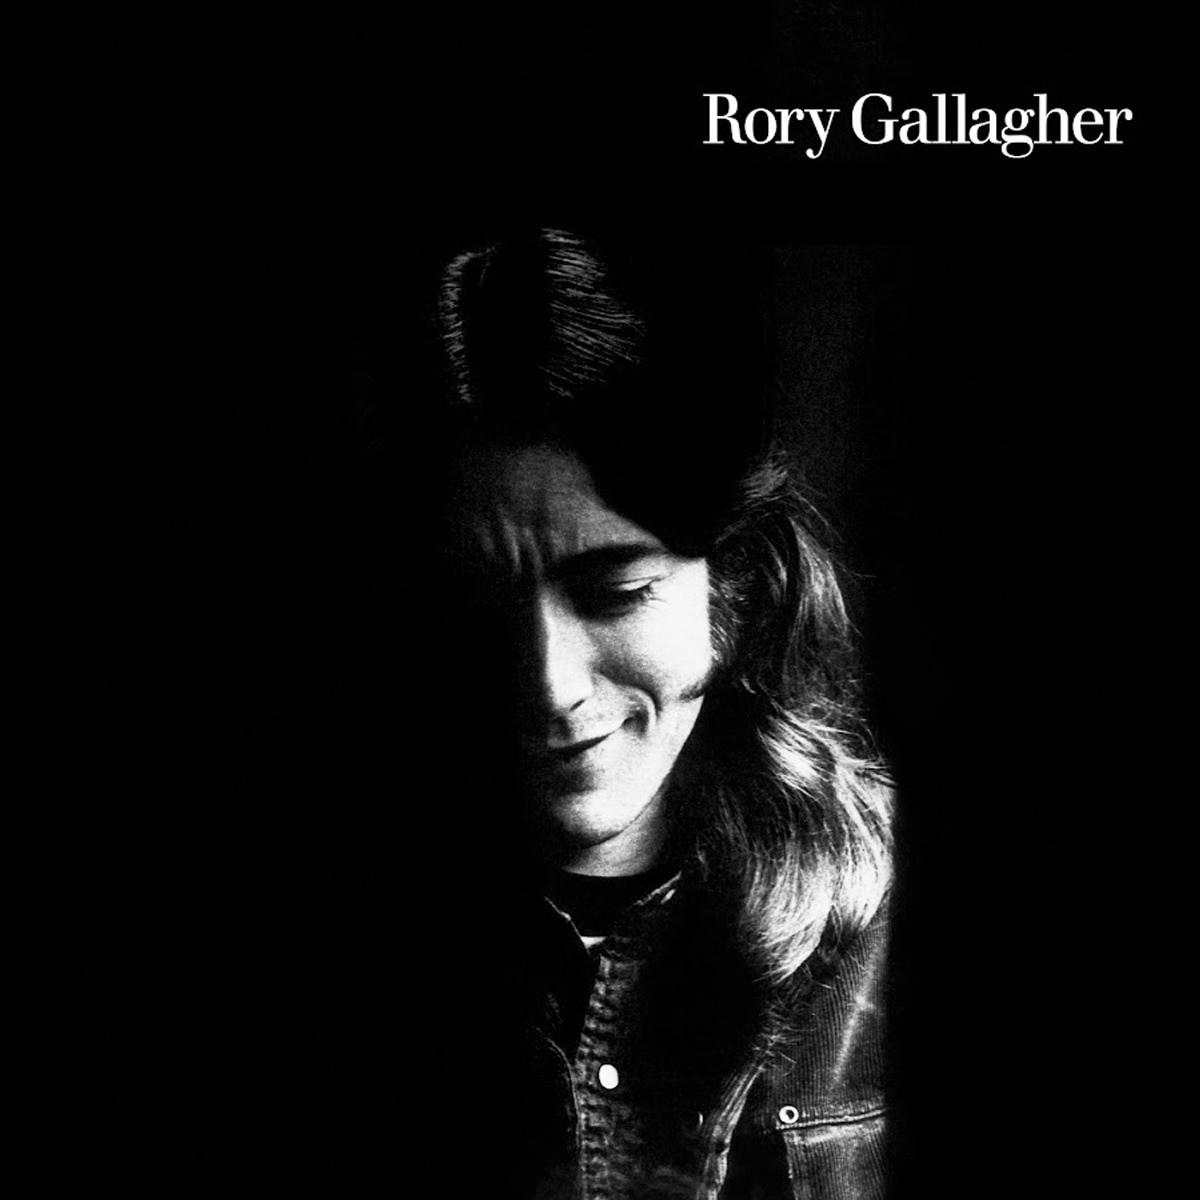 Rory gallagher1